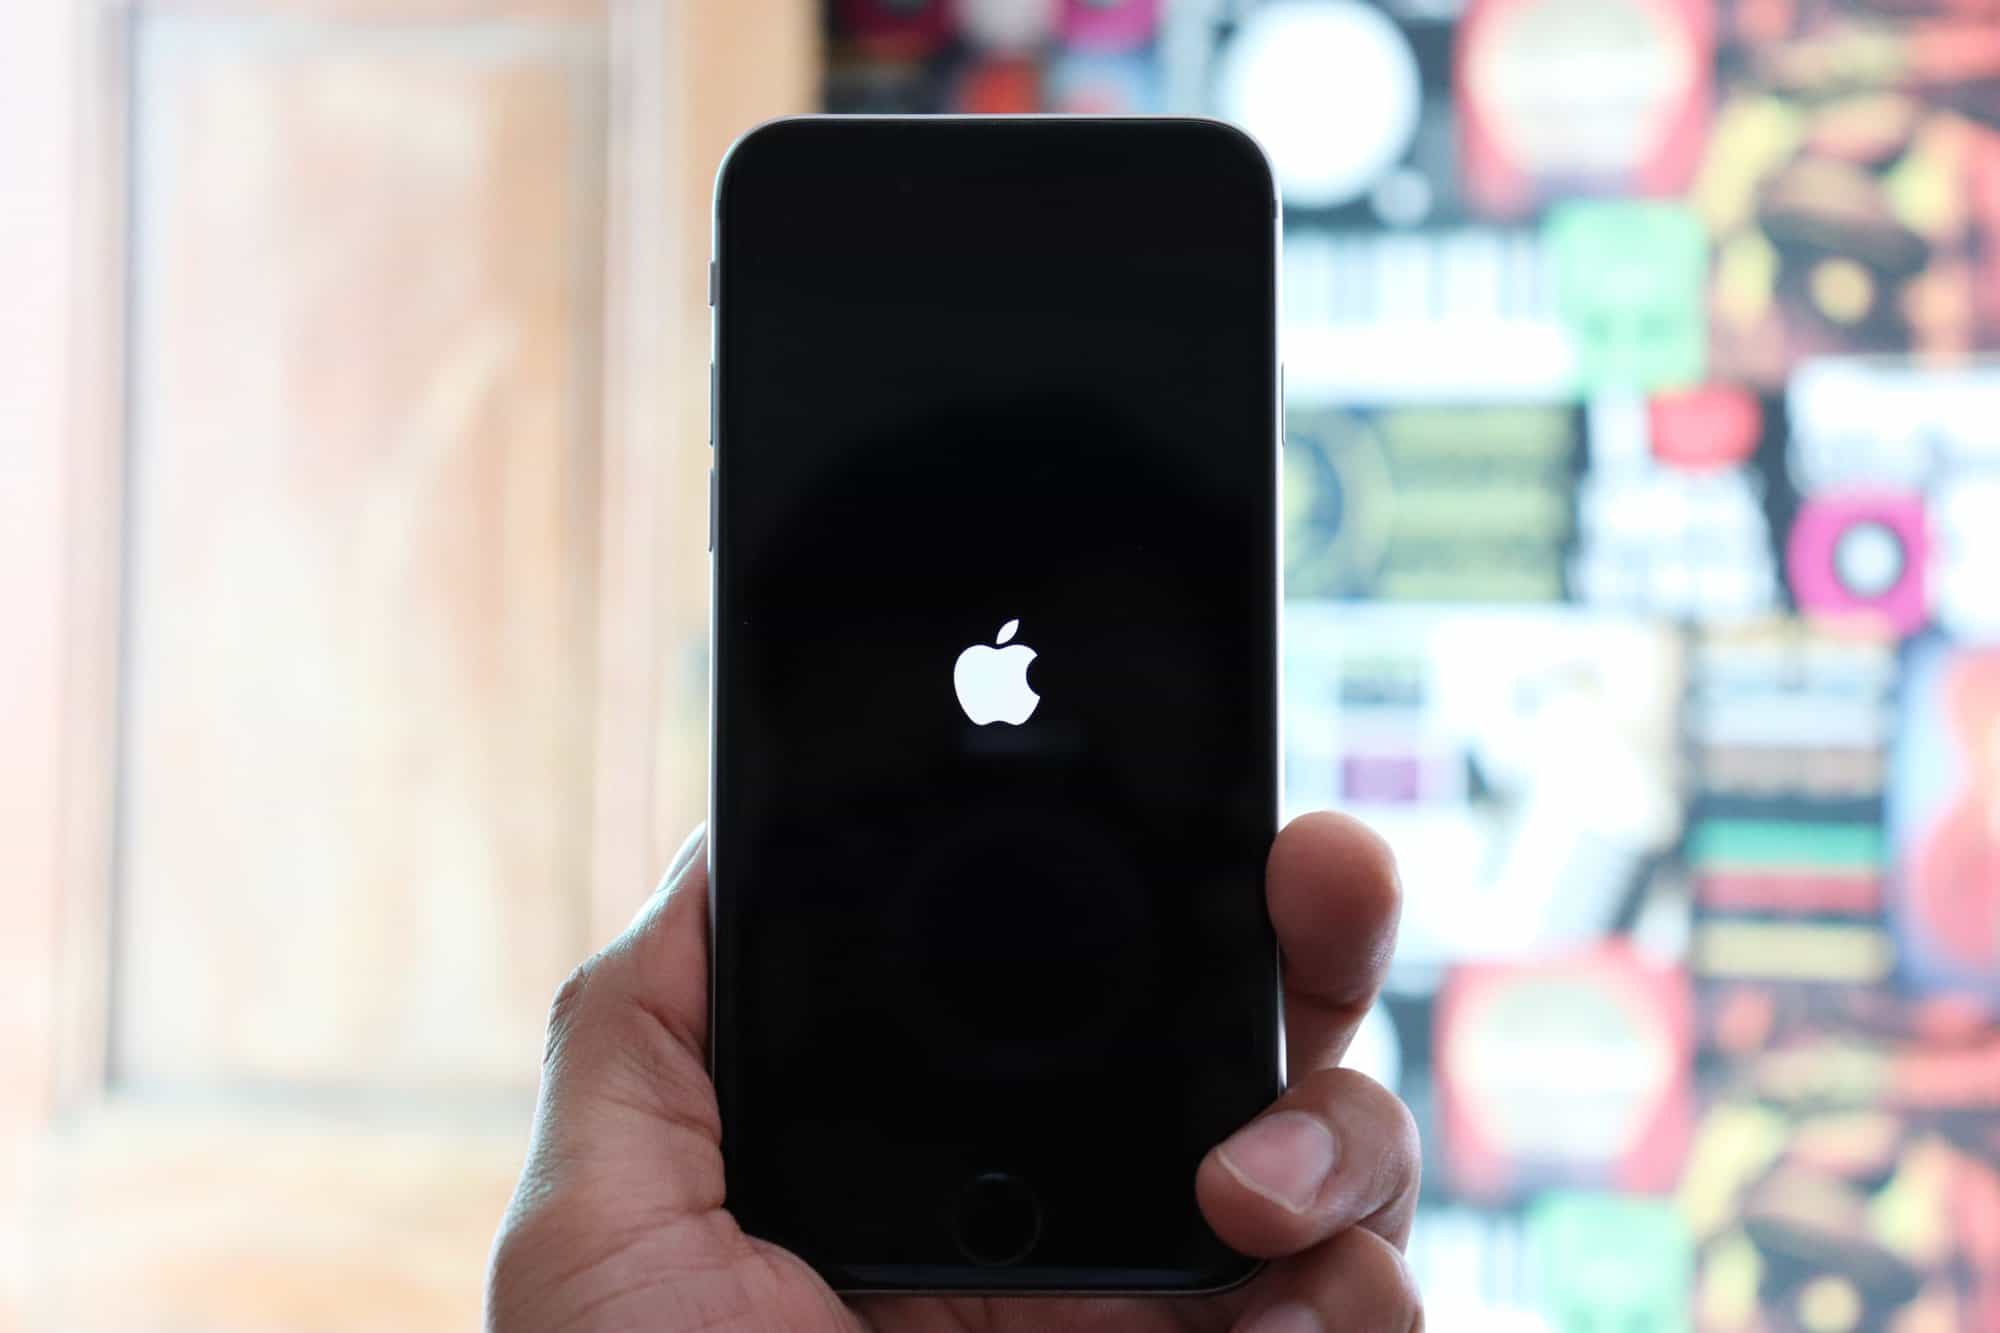 iPhone randomly restarts after installing iOS 12? Here's a fix